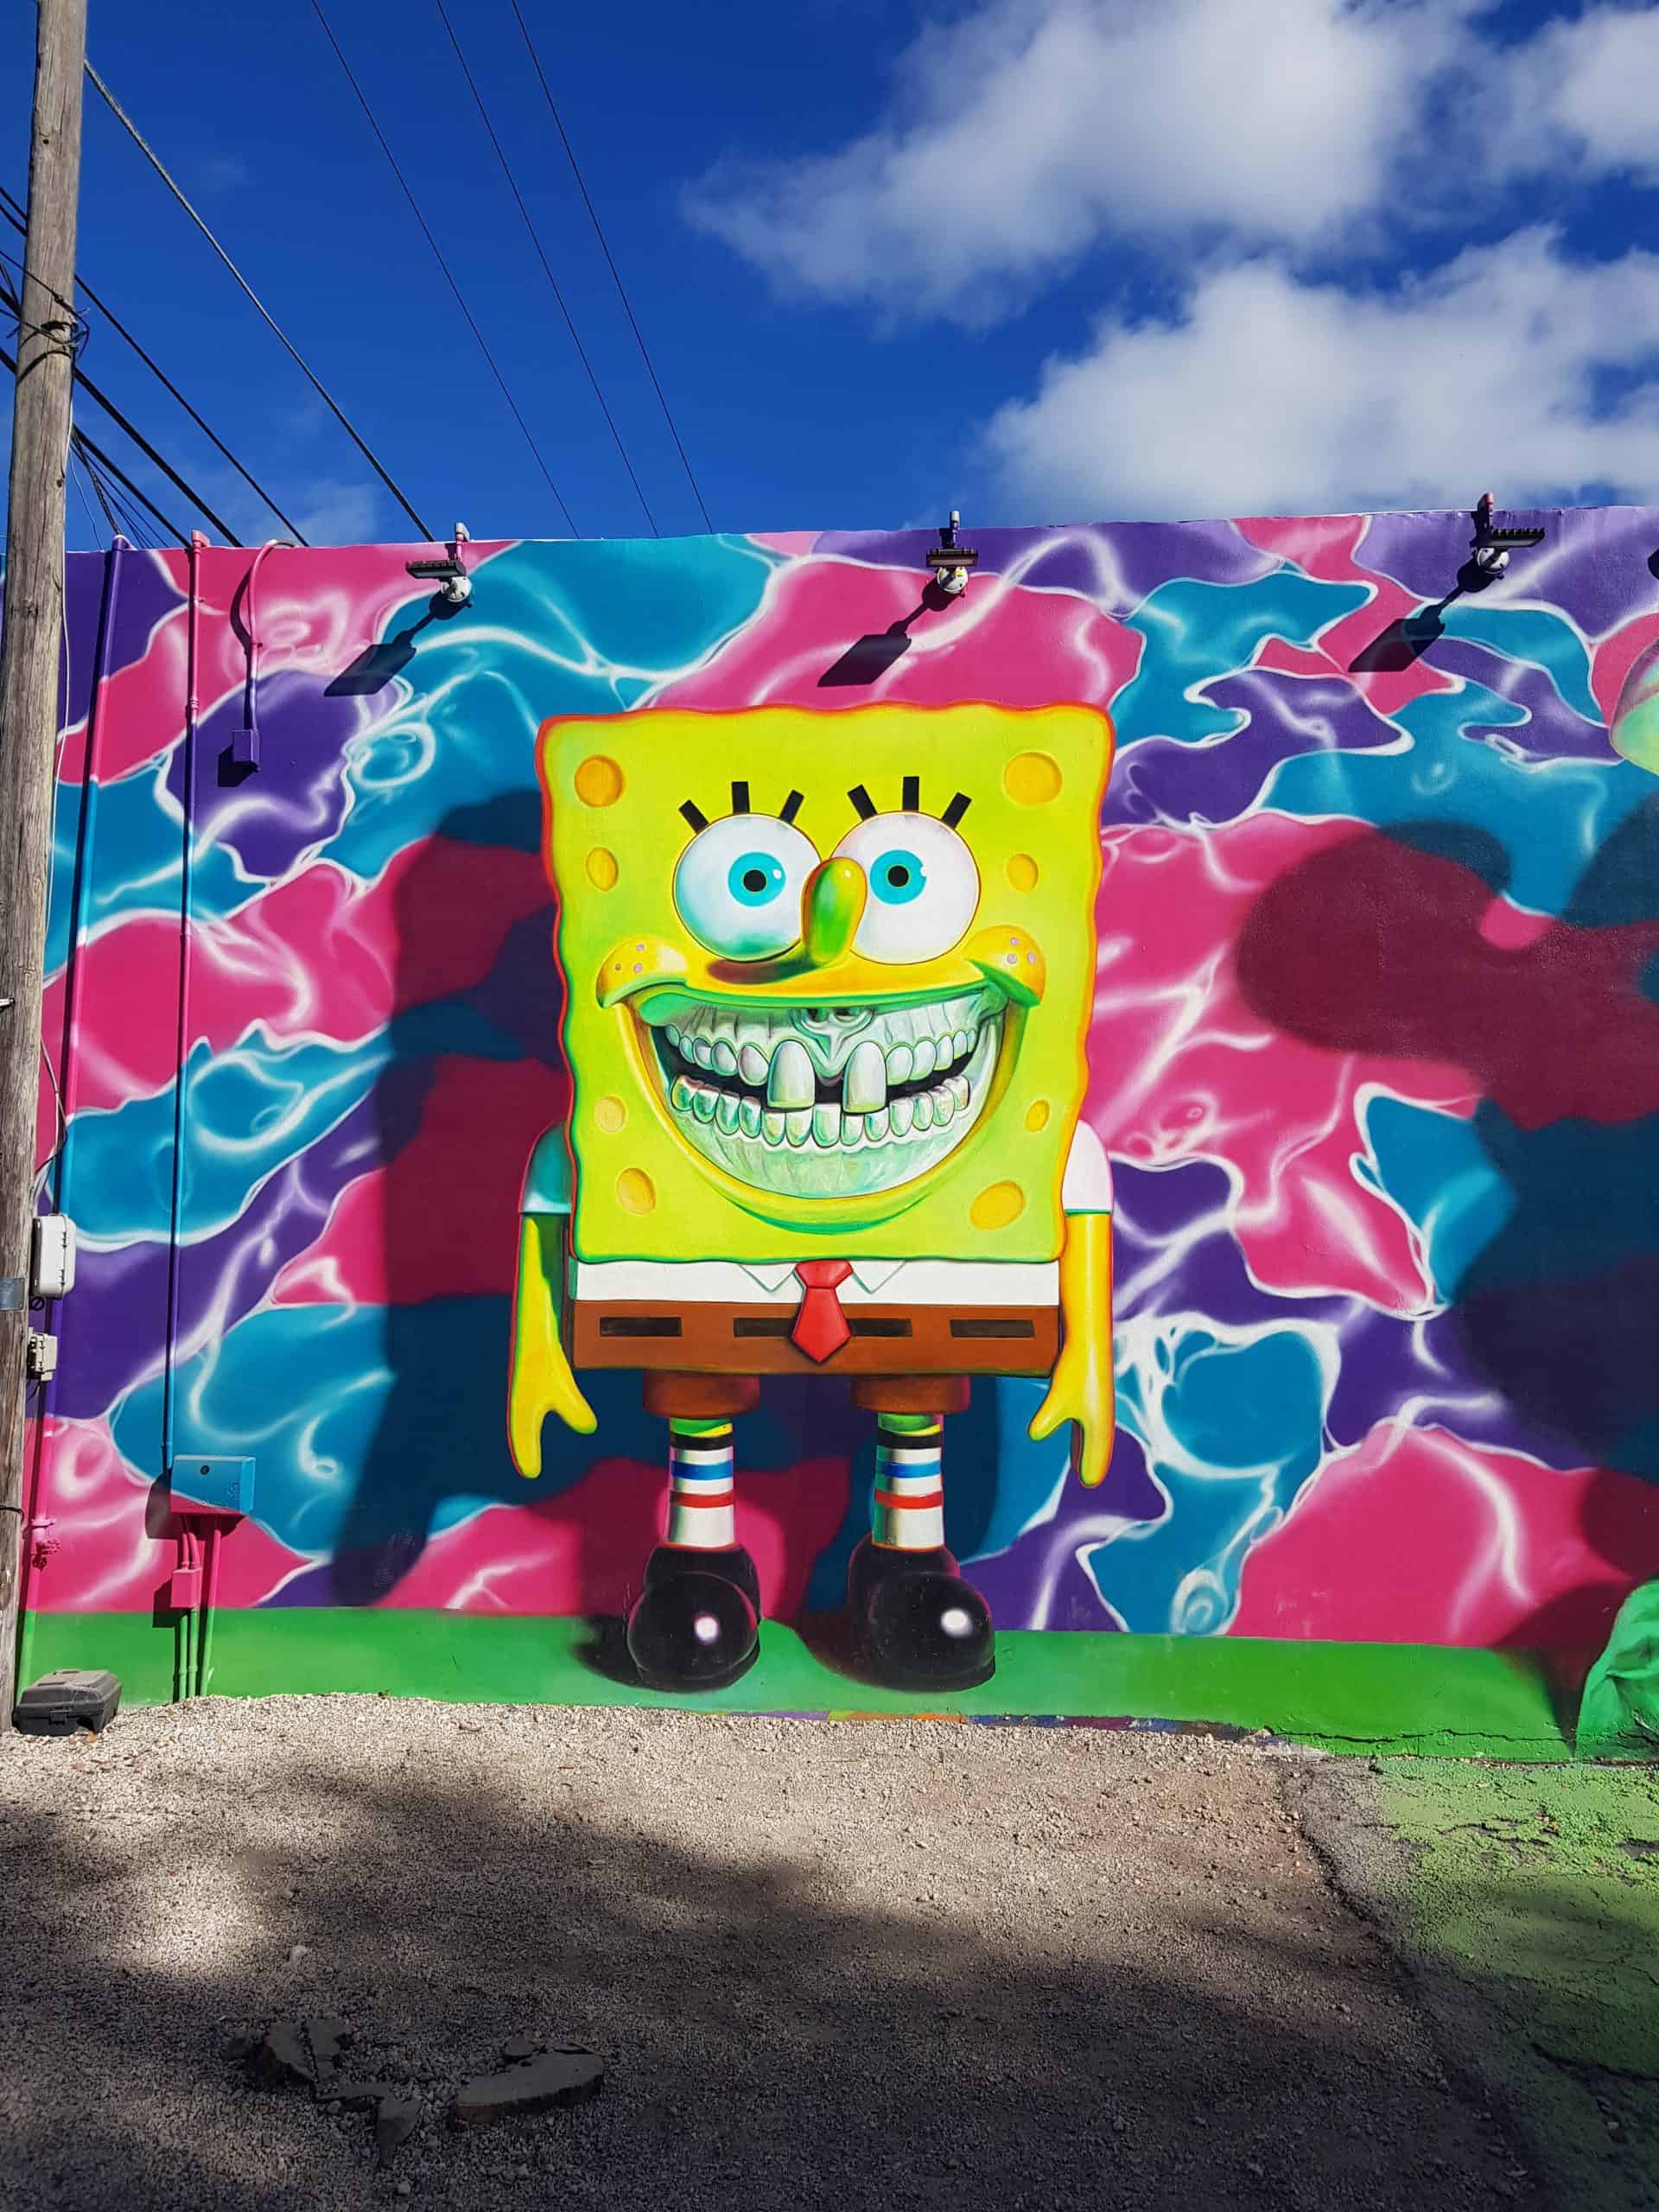 Miami: Colour, Concrete and Coffee at the Wynwood Walls ﻿